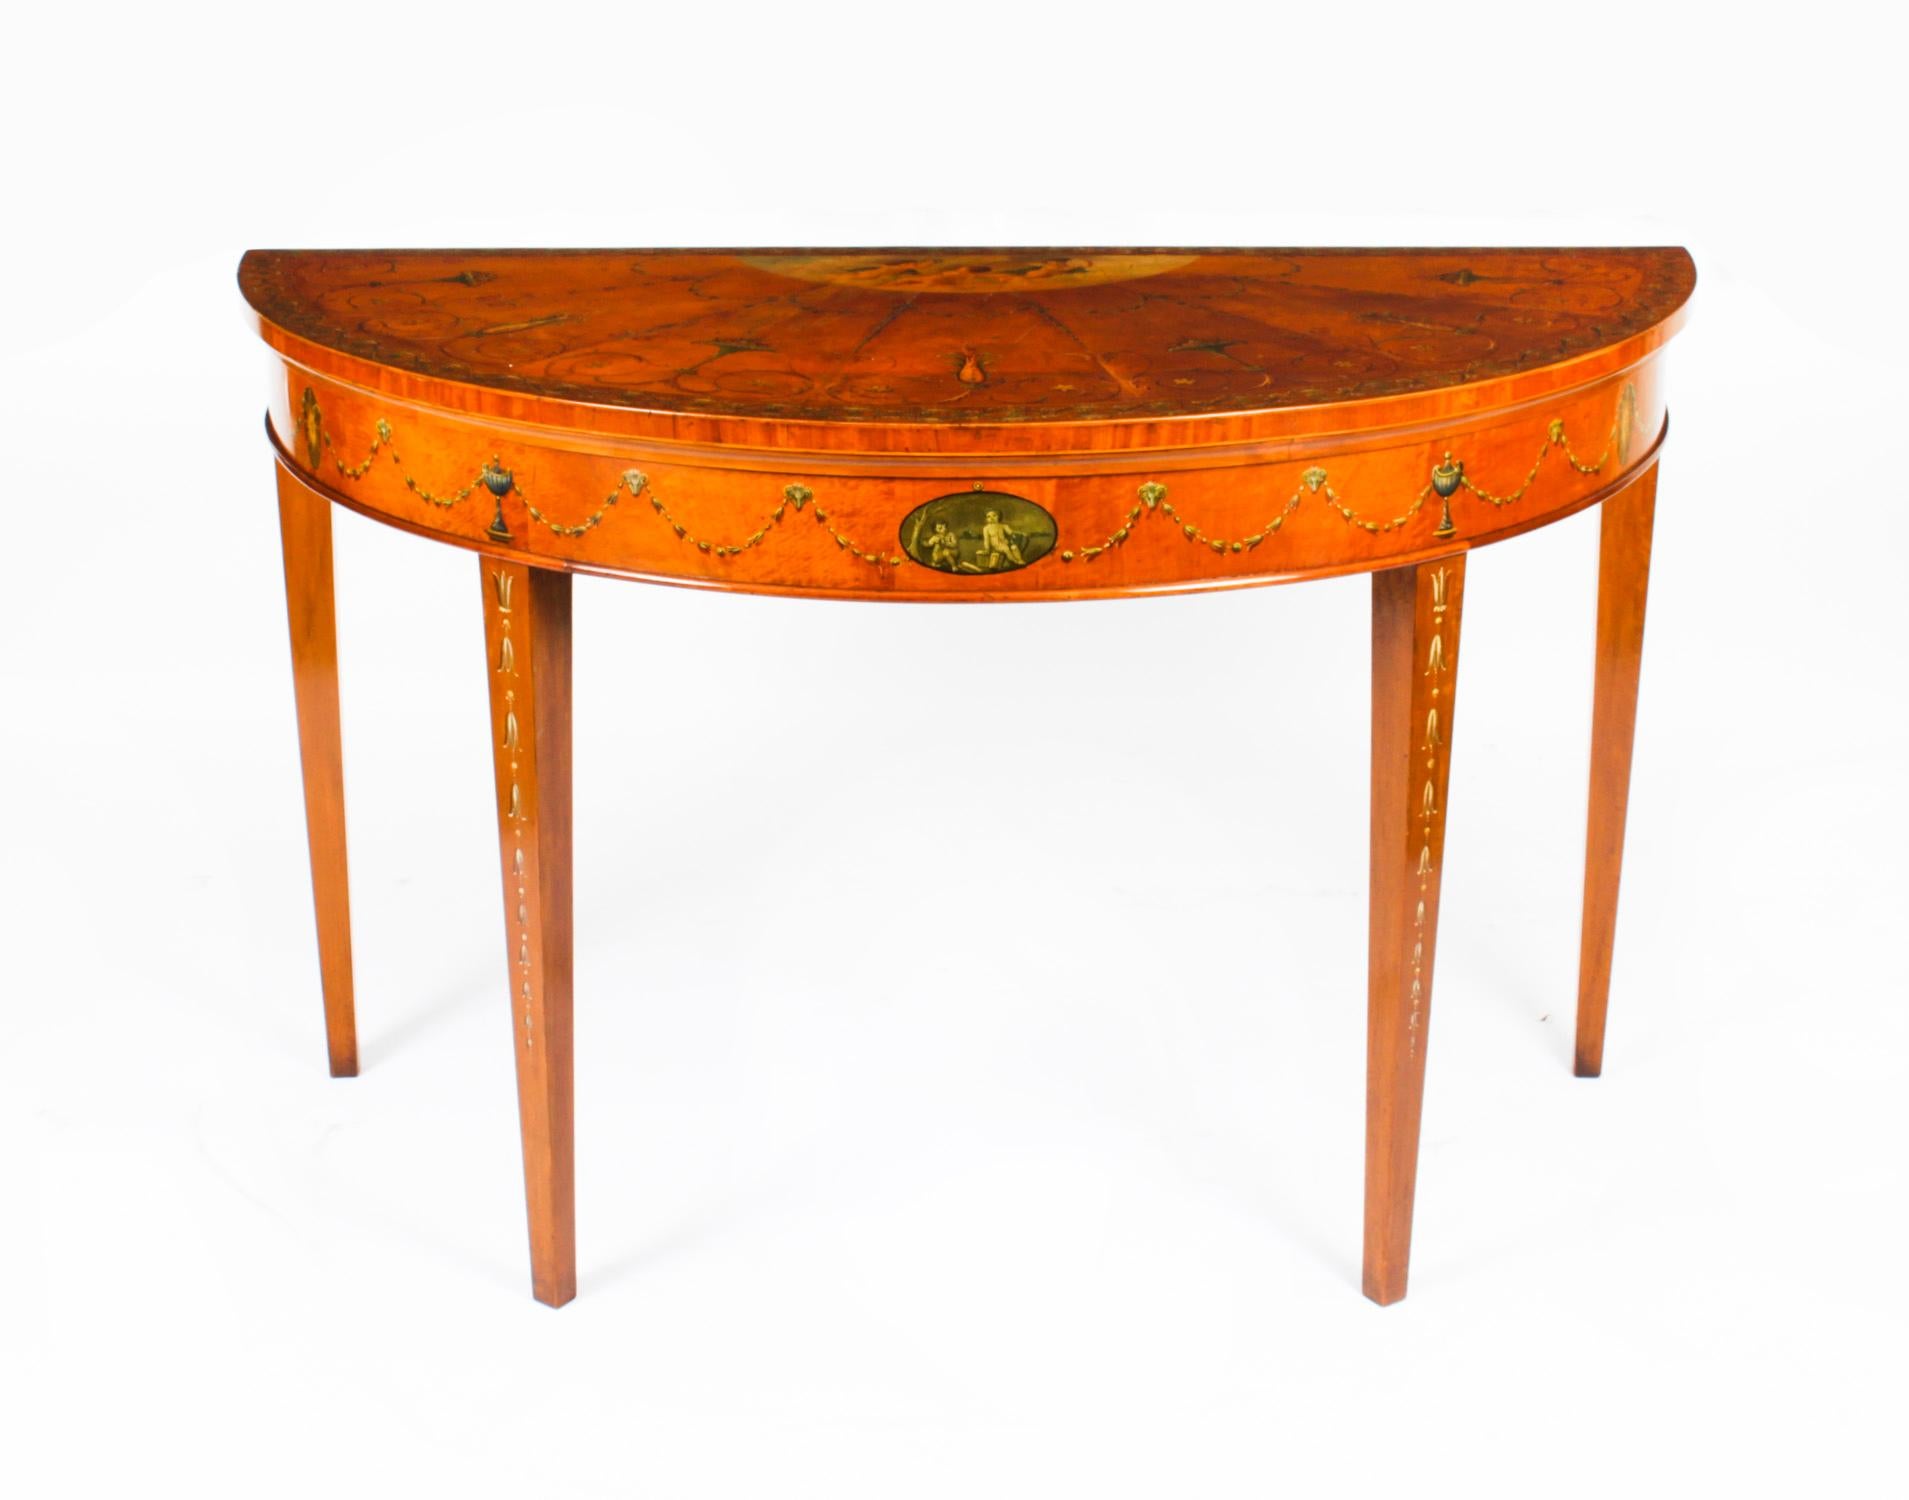 This is a beautiful antique George III hand painted satinwood demi-lune console table, circa 1780 in date.
 
The console is beautifully decorated with hand painted cherubs, floral, foliate and ribbon-tied flowering swags in the manner of Angelica